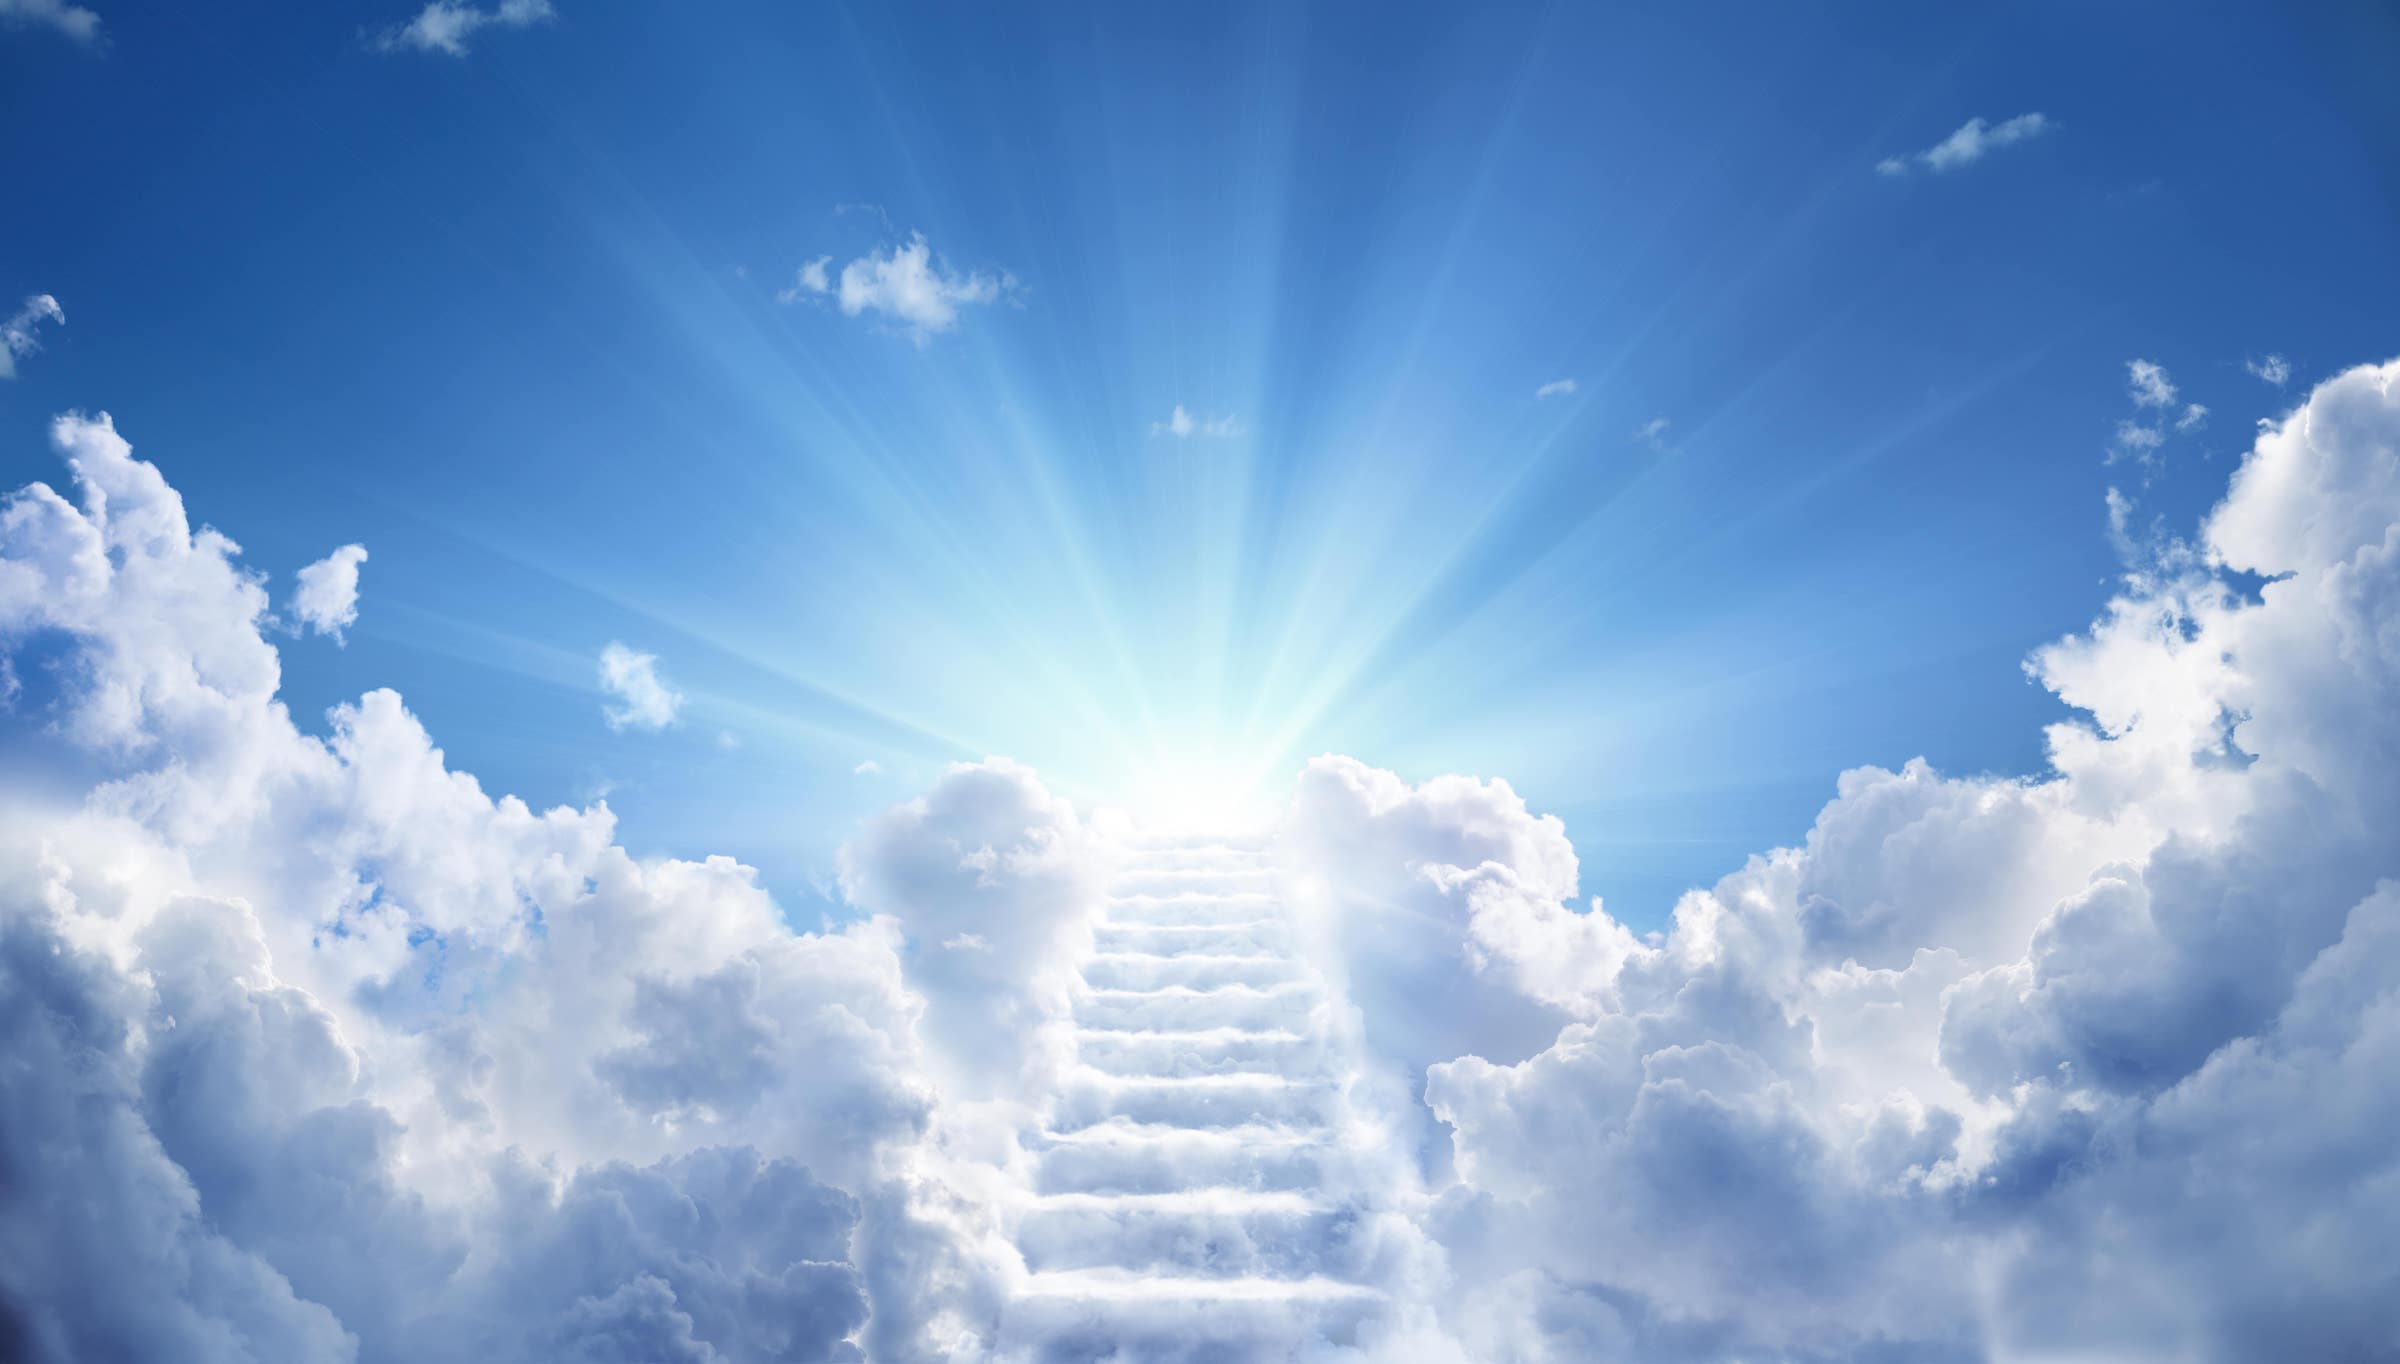 A stairwell covered and surrounded by clouds leading into a blue sky